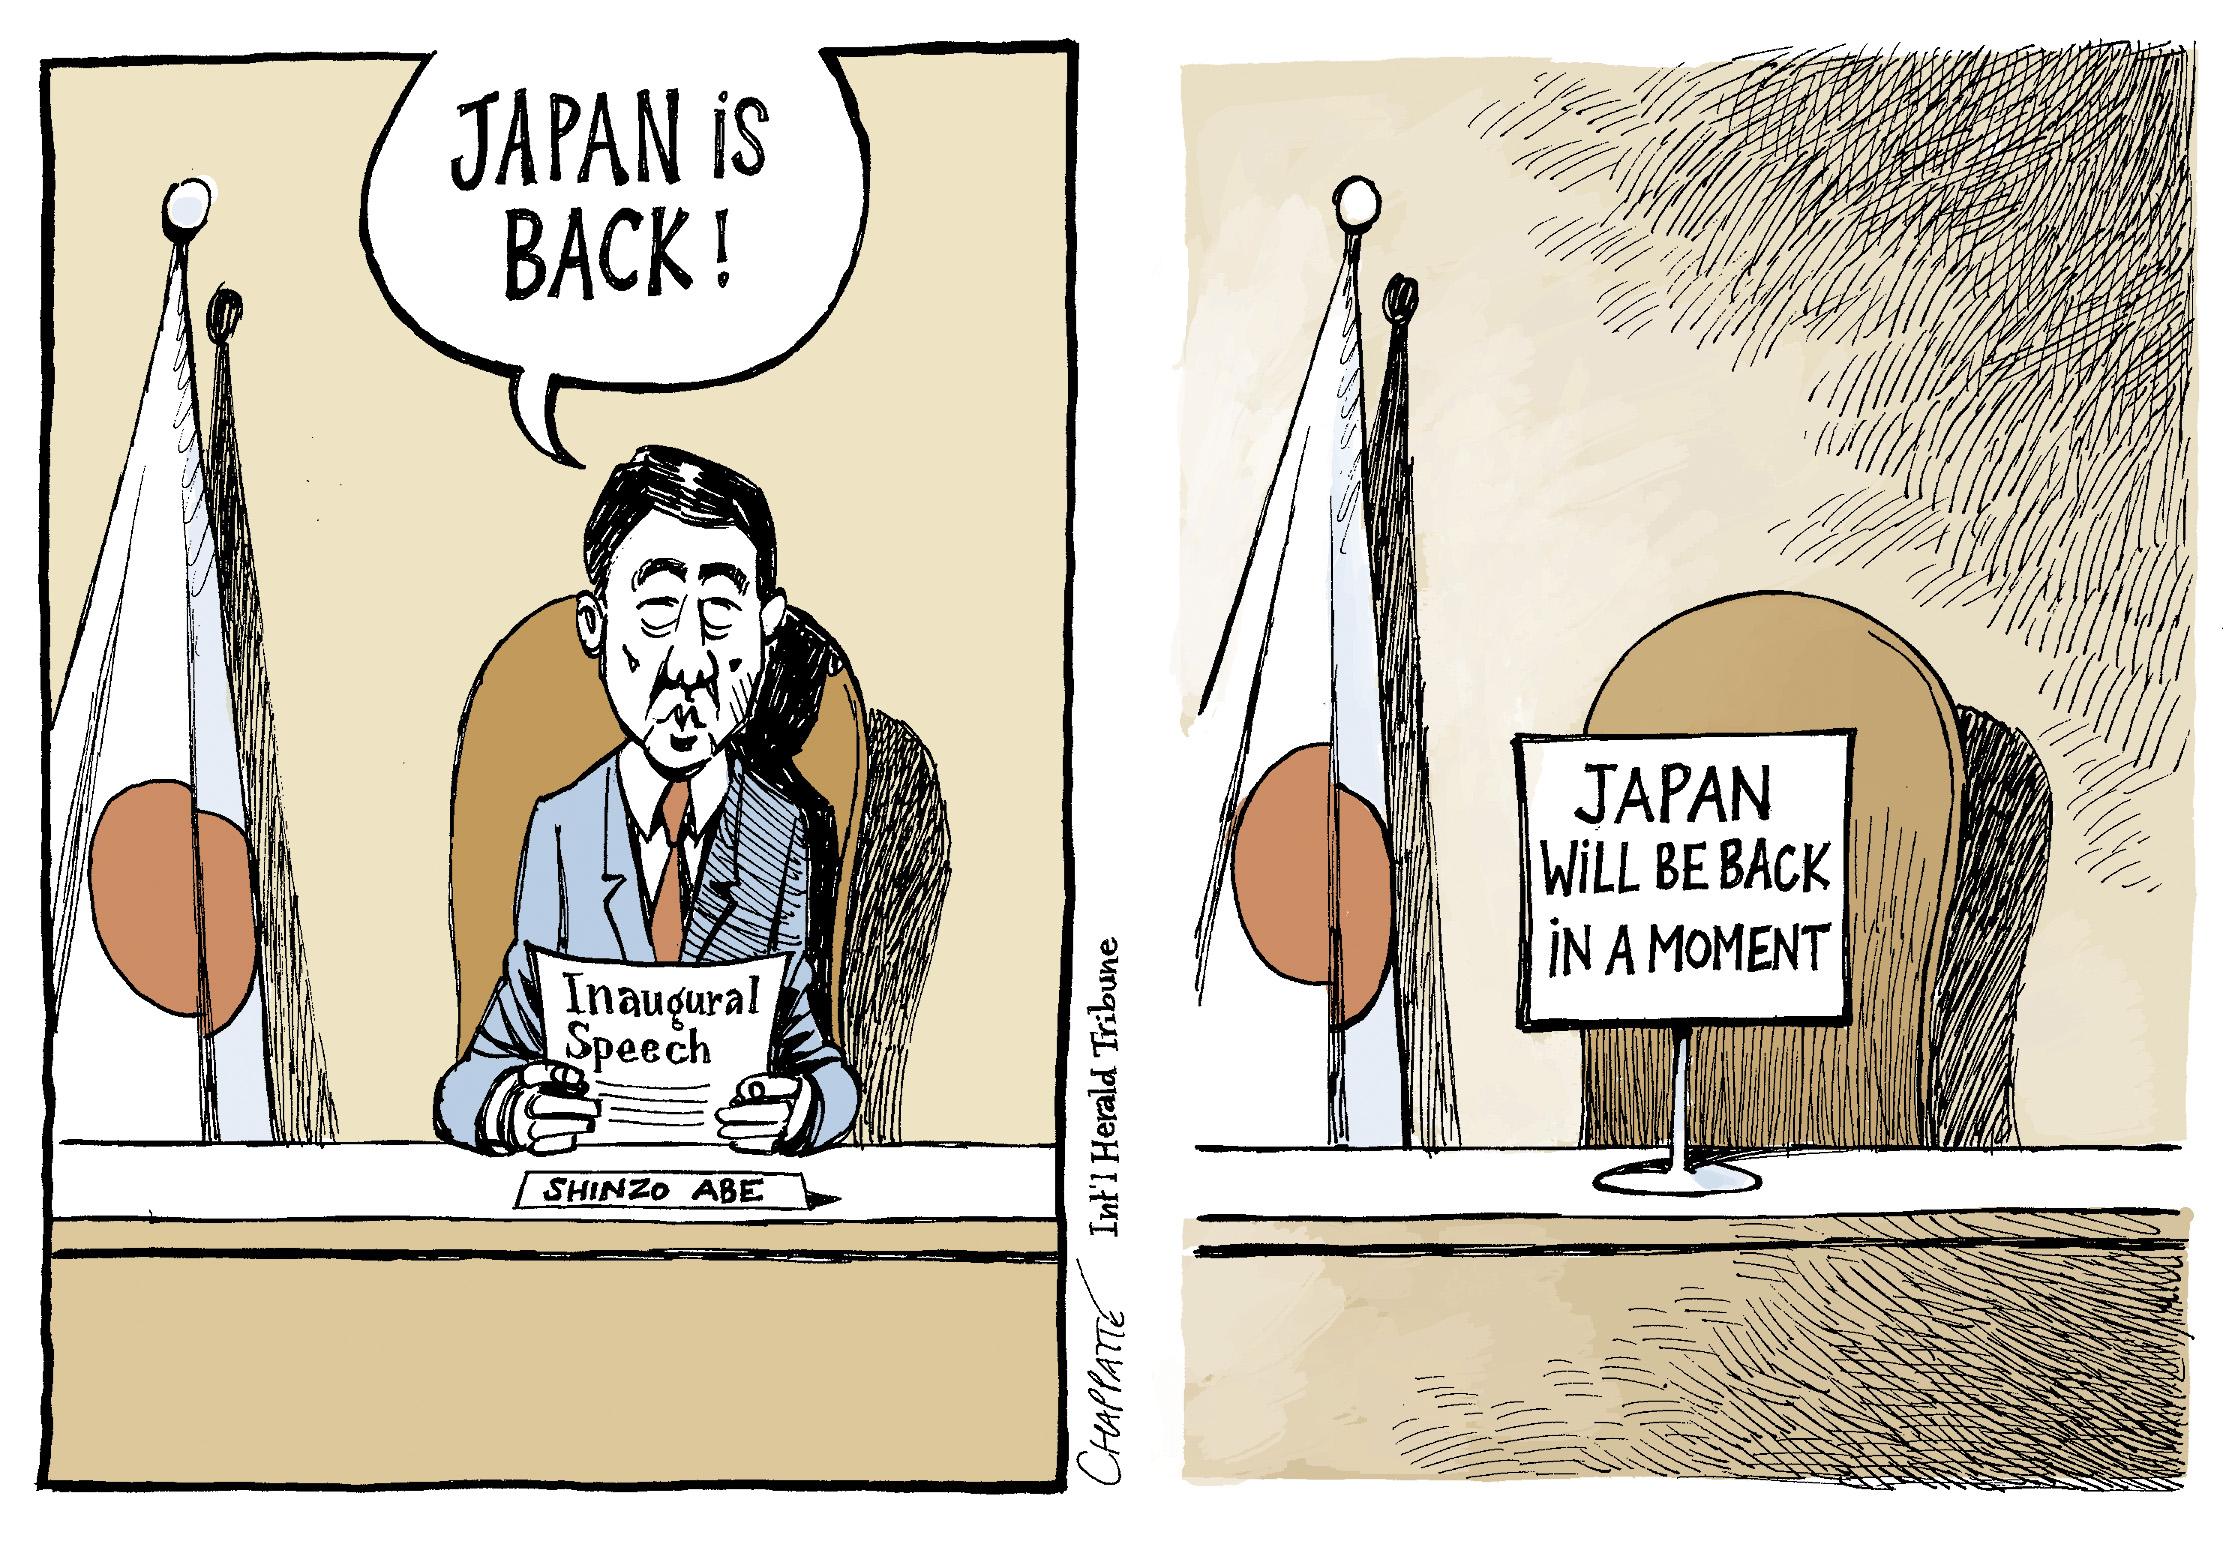 The short career of a Japanese PM